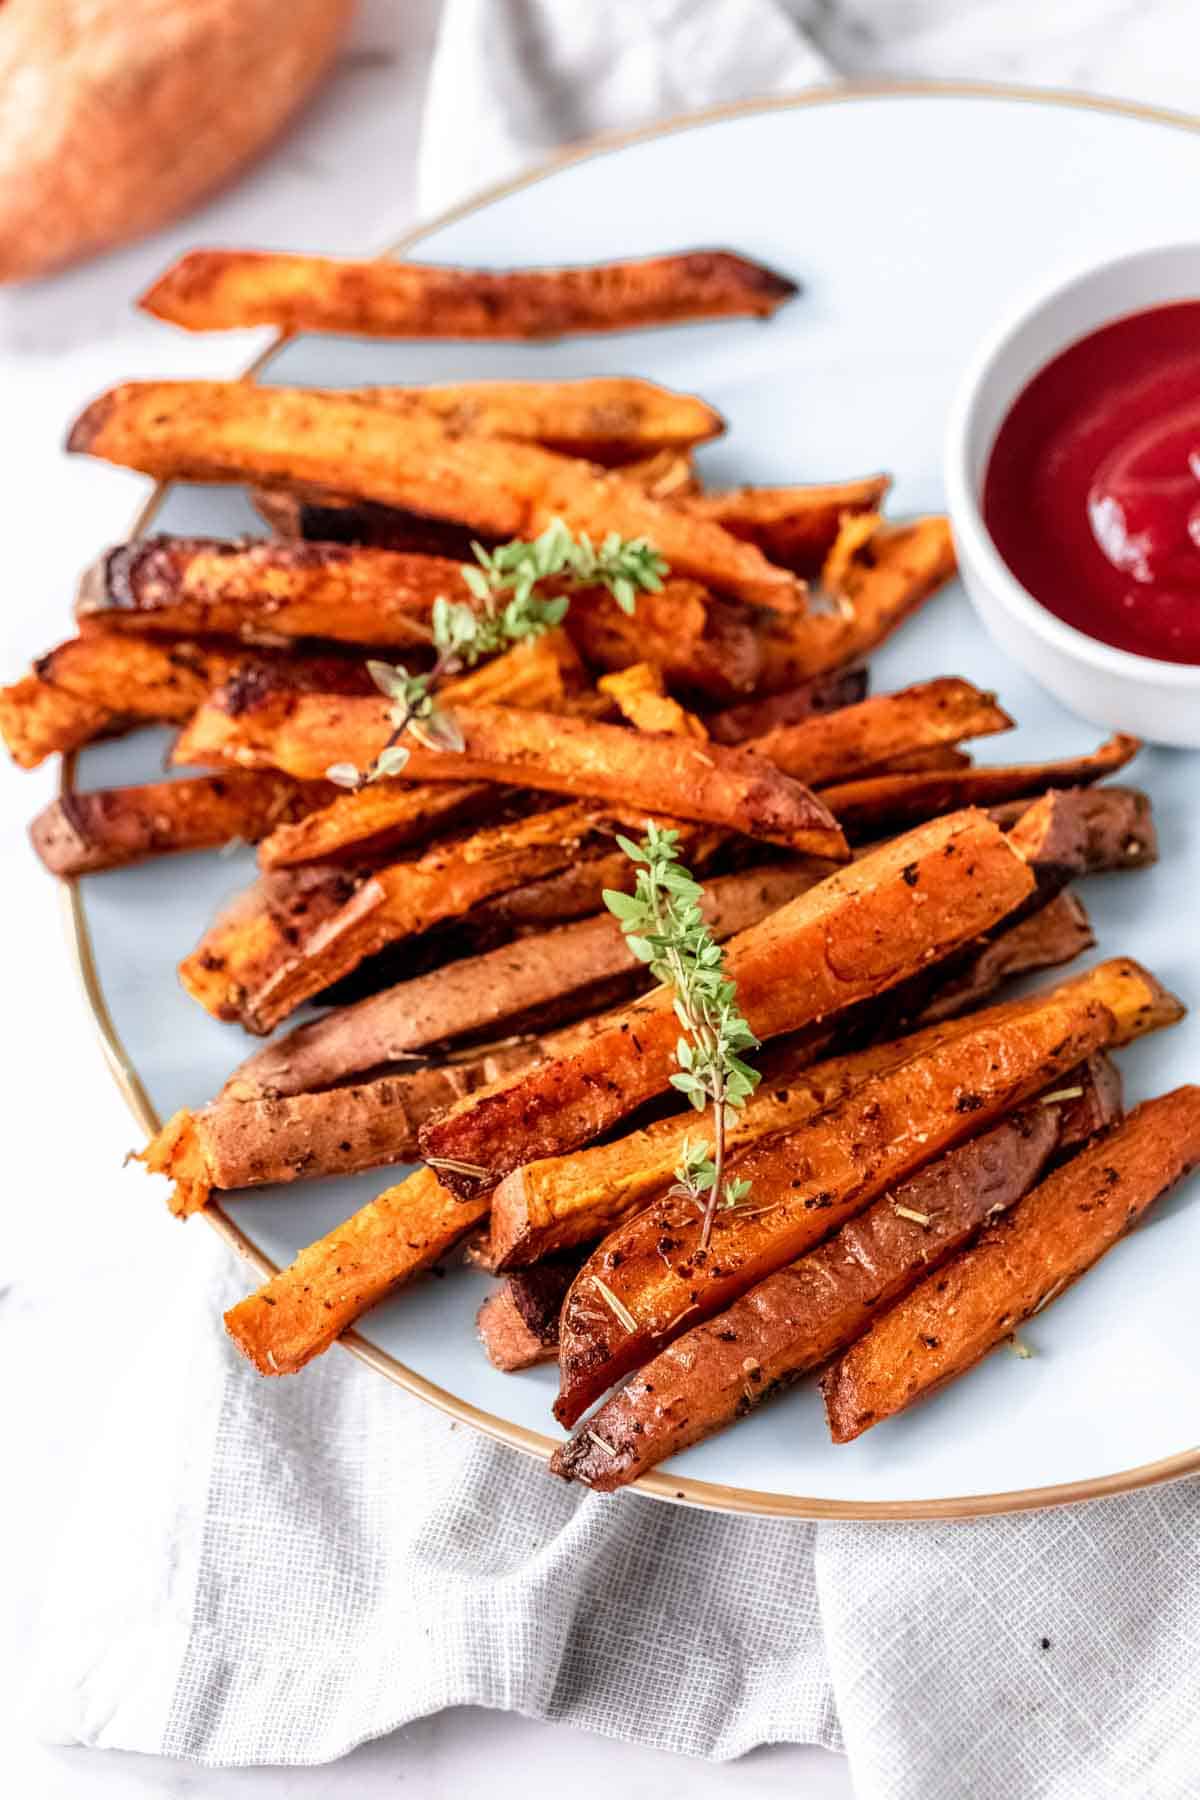 Herbes de Provence baked sweet potato fries on a white plate next to a bowl of ketchup.